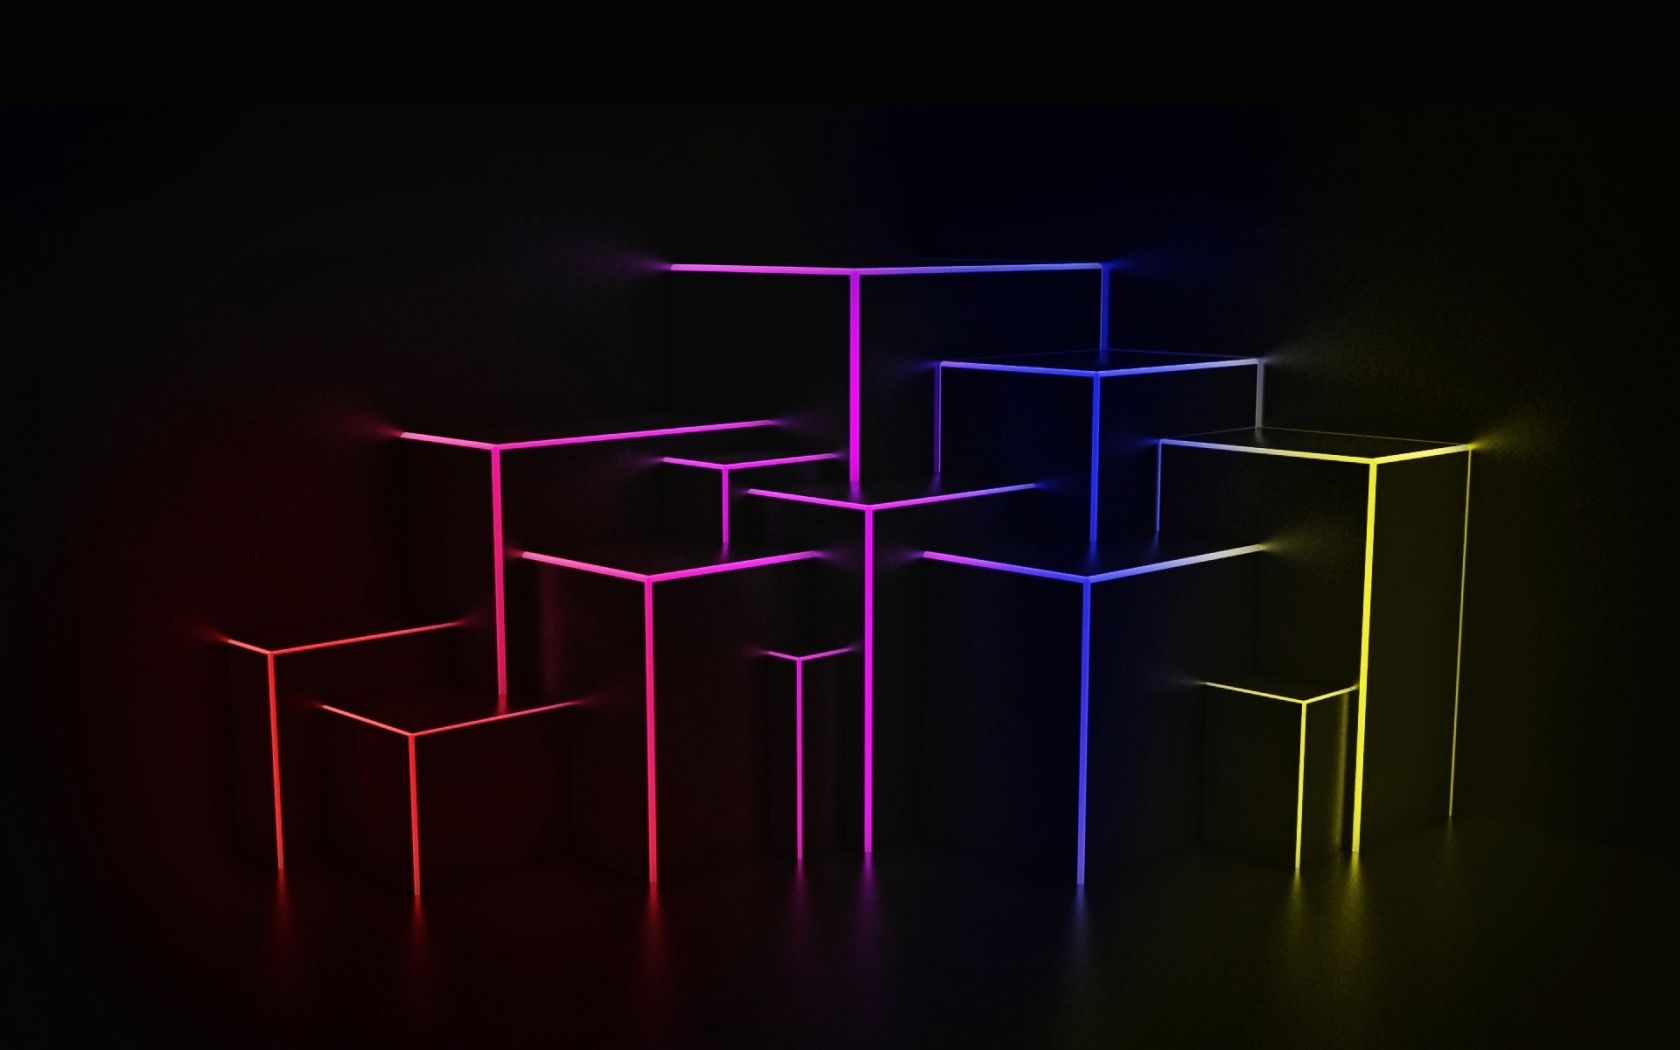 Free download 4K Neon Wallpaper High Quality Download 3840x2400